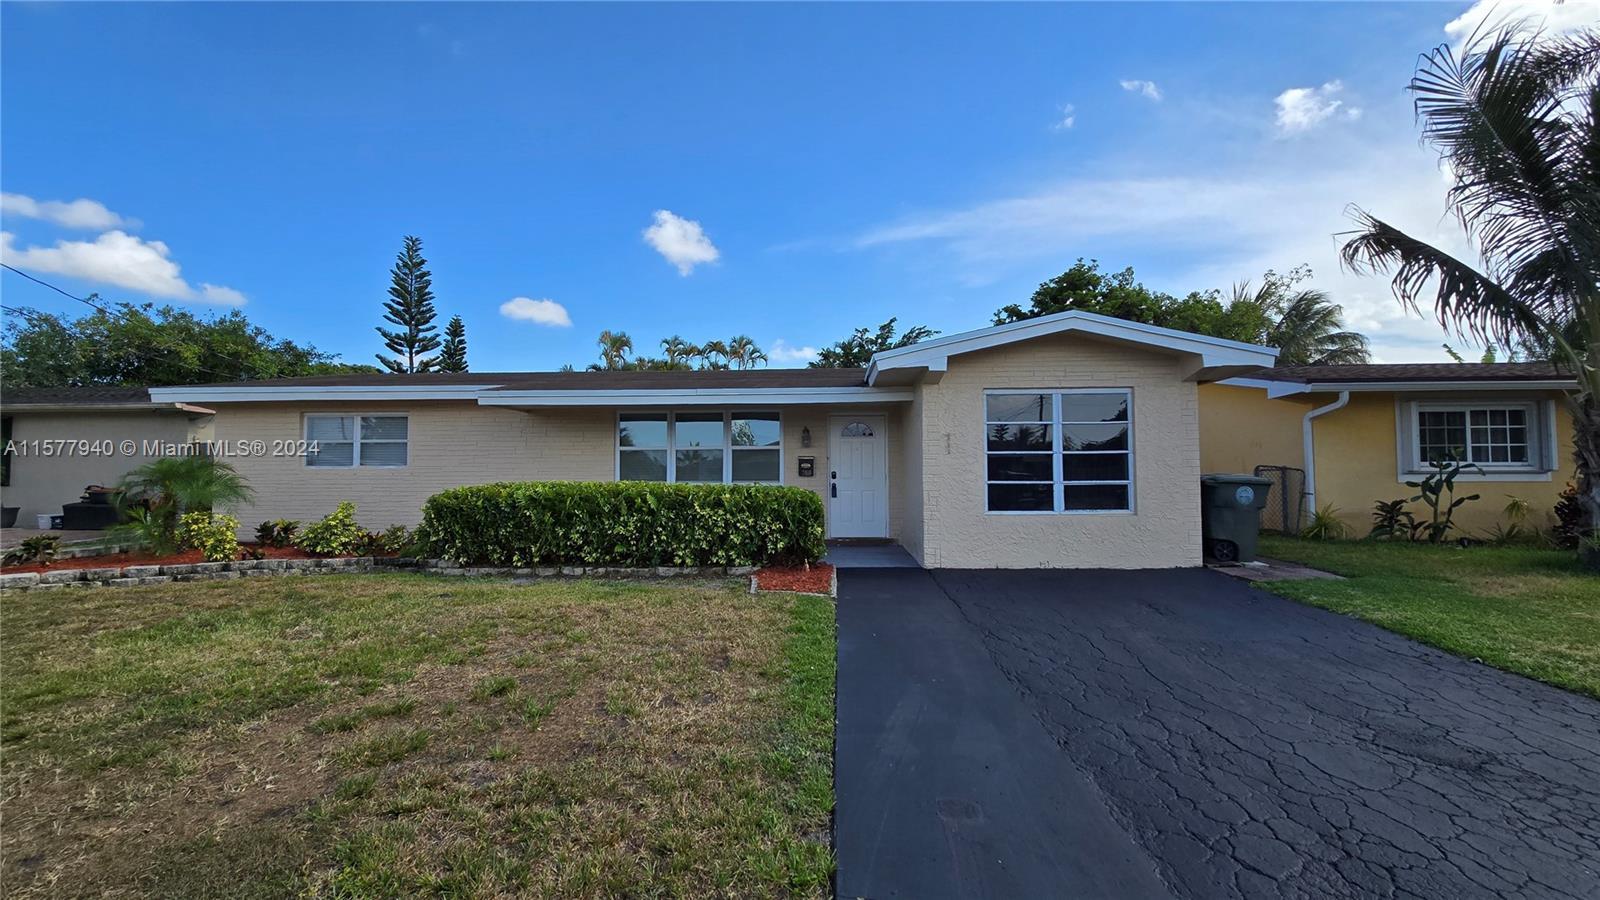 Photo of 7910 NW 14th St in Pembroke Pines, FL